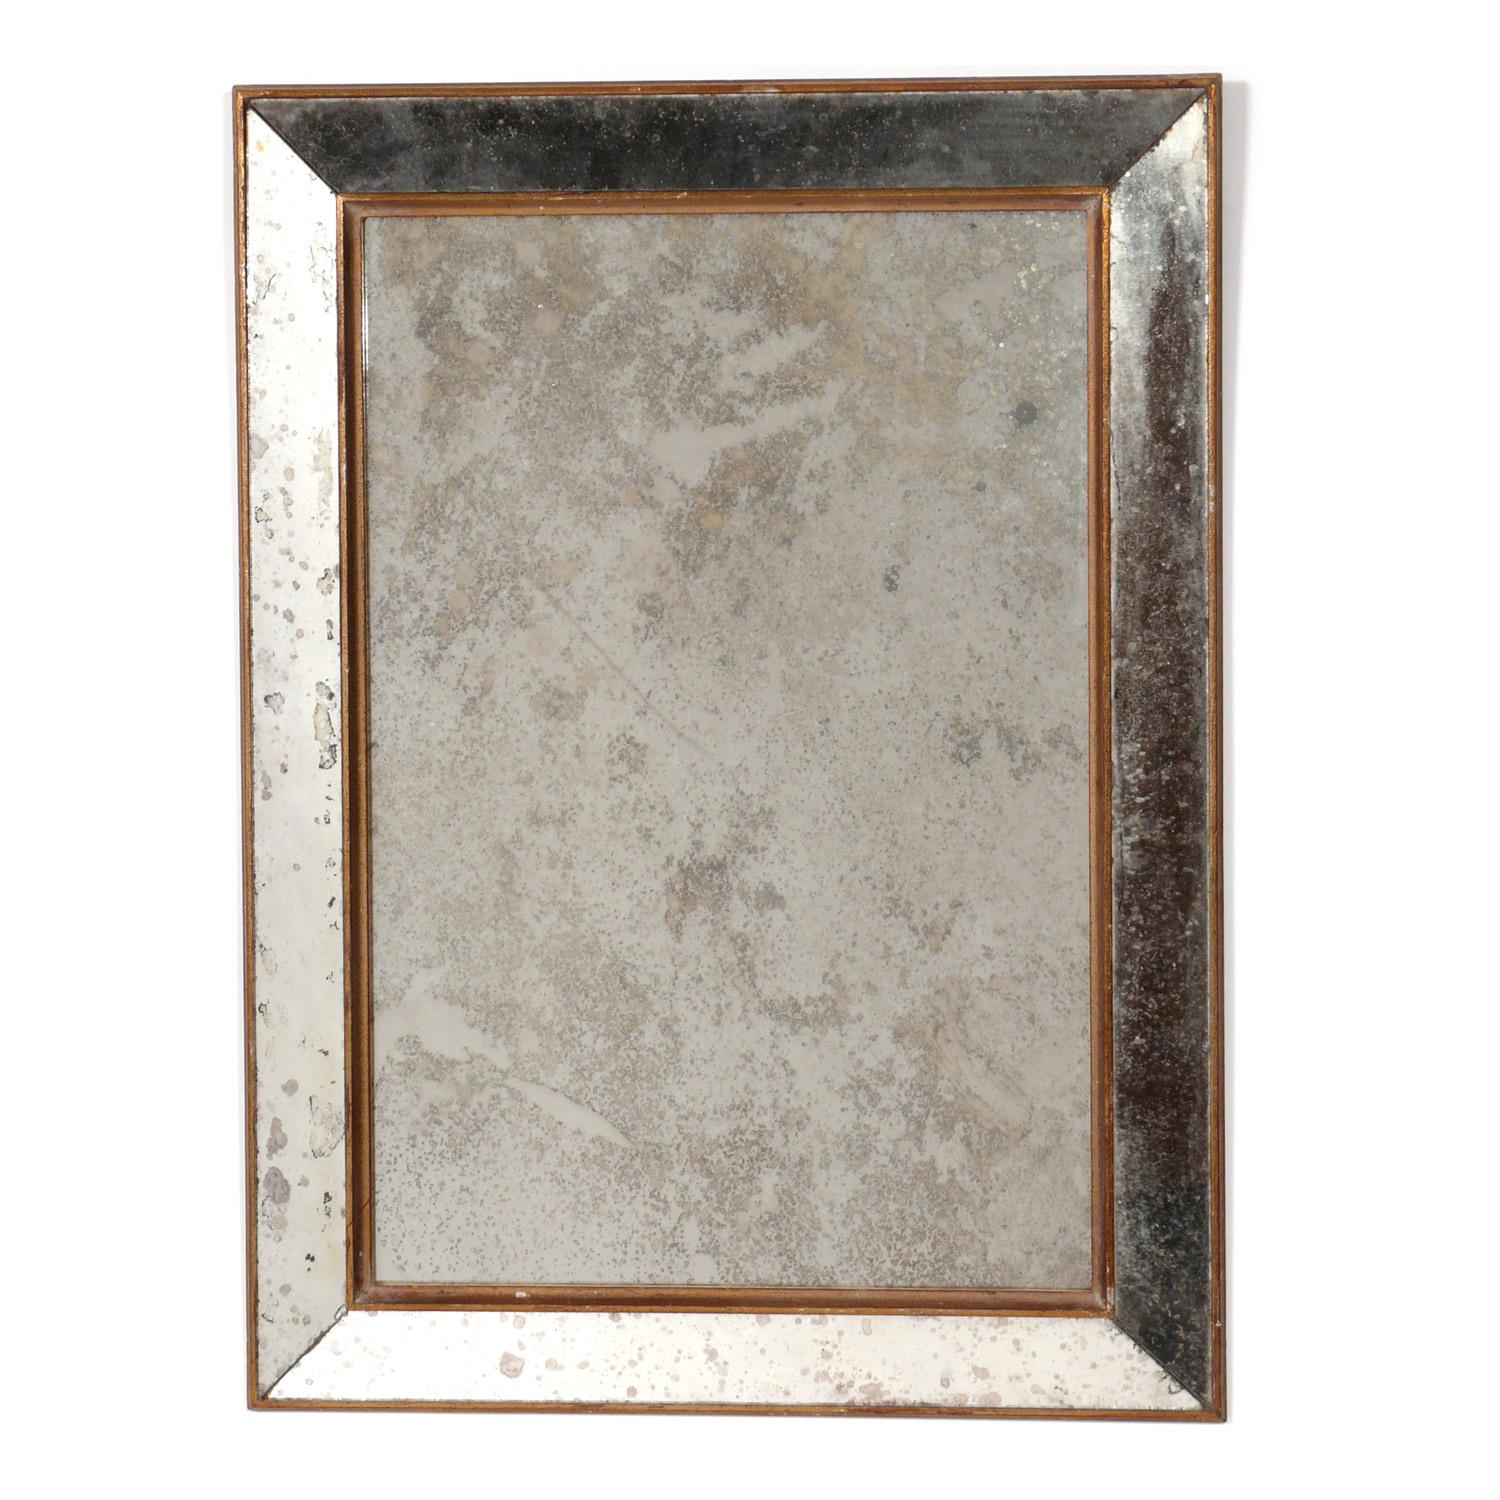 Selection of Petite Mirrors, American or Italian, circa 1950s. From left to right, as seen in the first photo, they are: 
1) Antiqued mirrored frame mirror. It measures 23